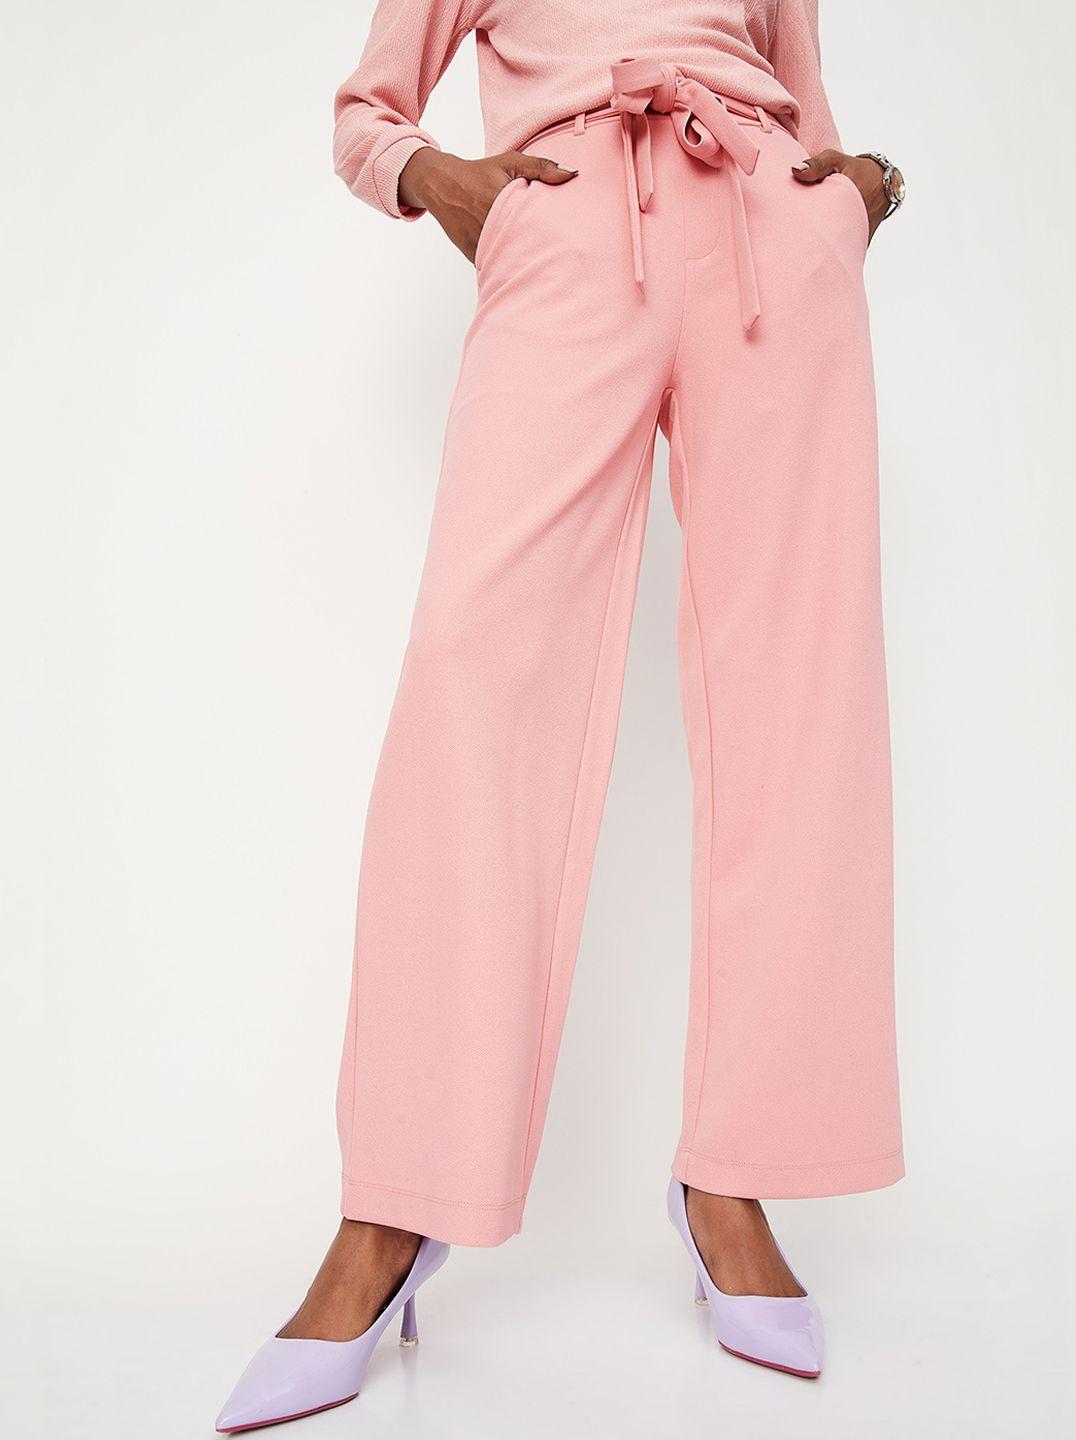 max-women-flared-parallel-trousers